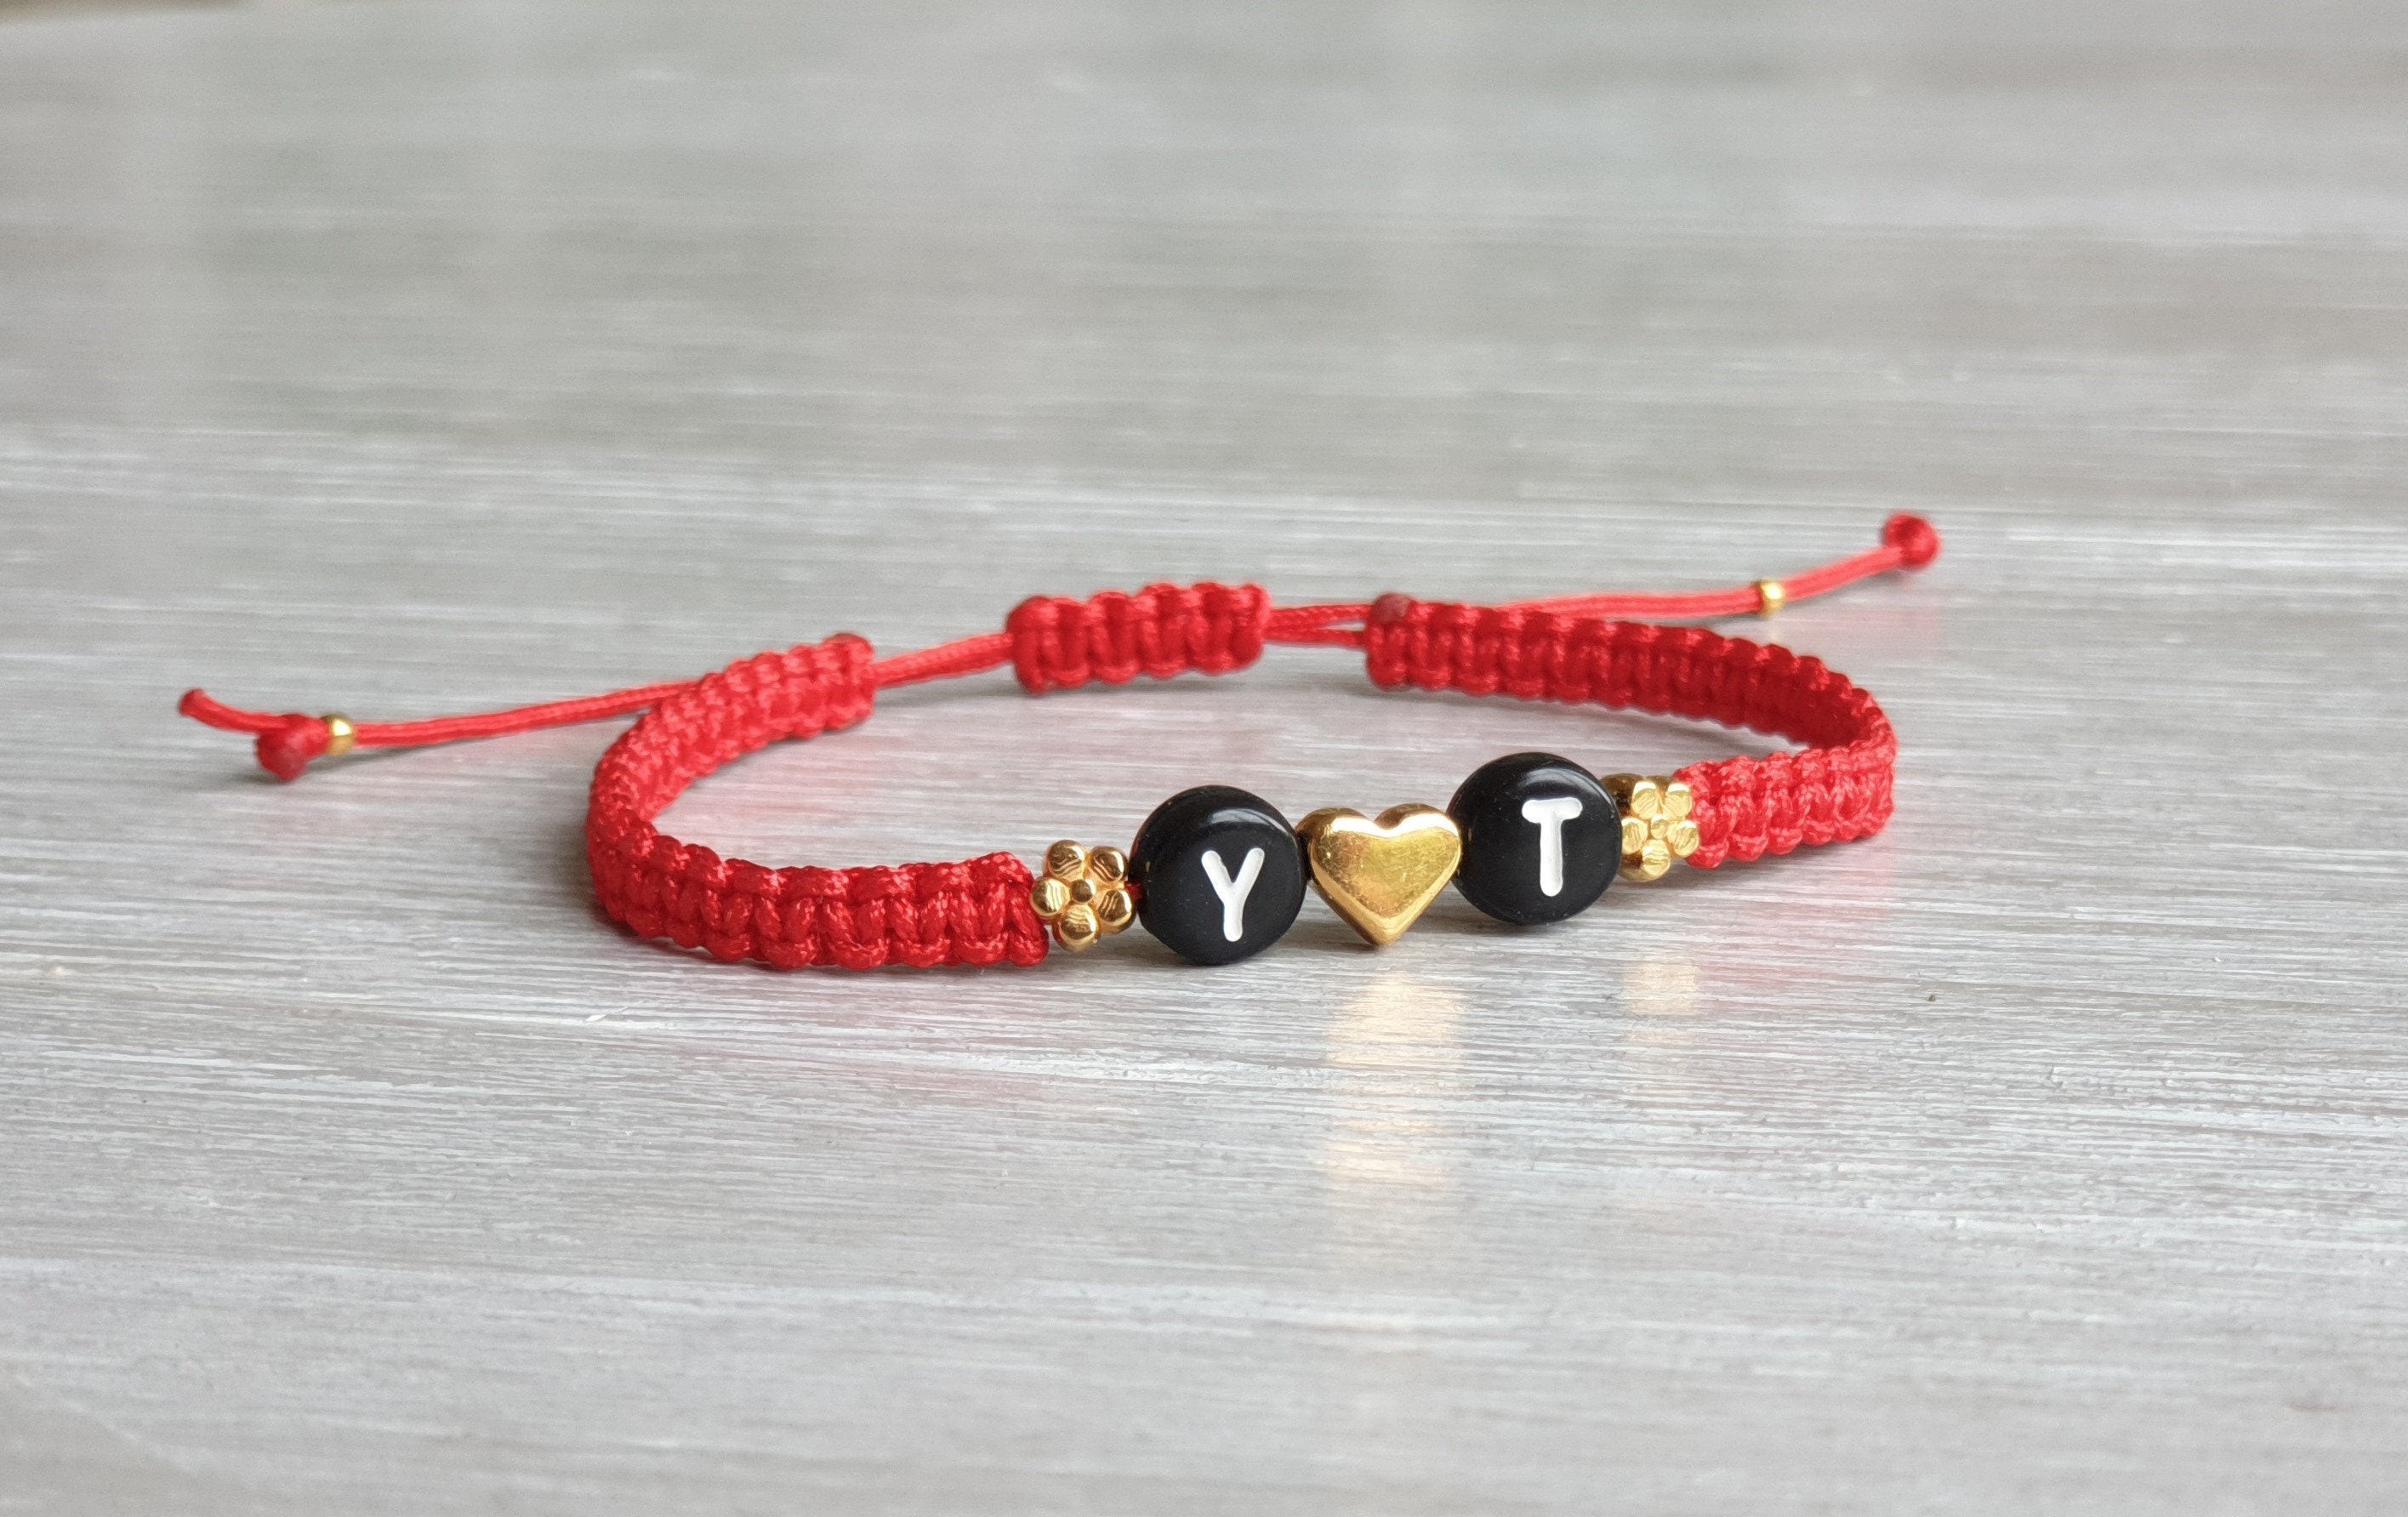 DIY Friendship Bracelets with Letter Beads  Other  Friendship bracelets  with beads Diy friendship bracelets with letter beads Friendship bracelet  patterns easy